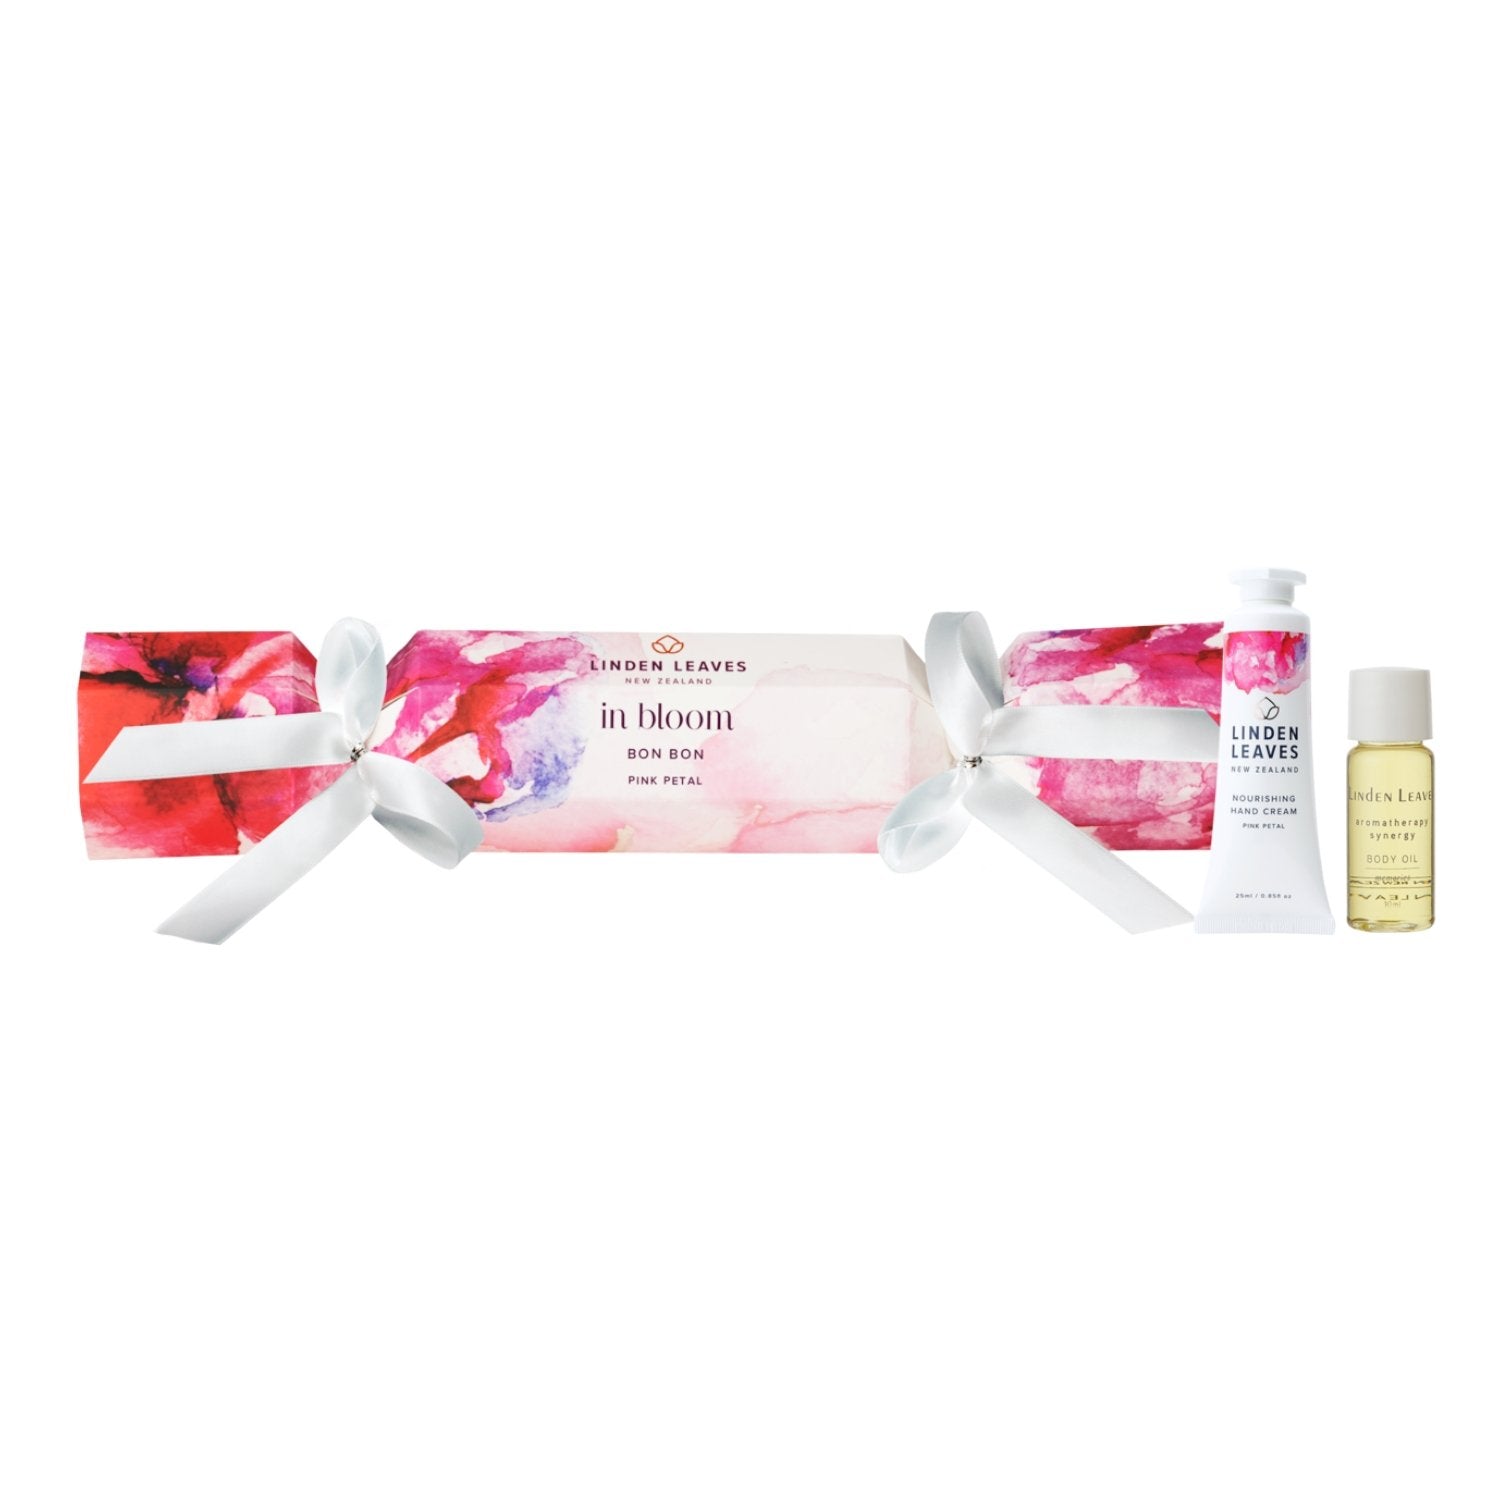 Linden Leaves Pink Petal Bonbon (hand cream and body oil inside) - Beautiful Gifts